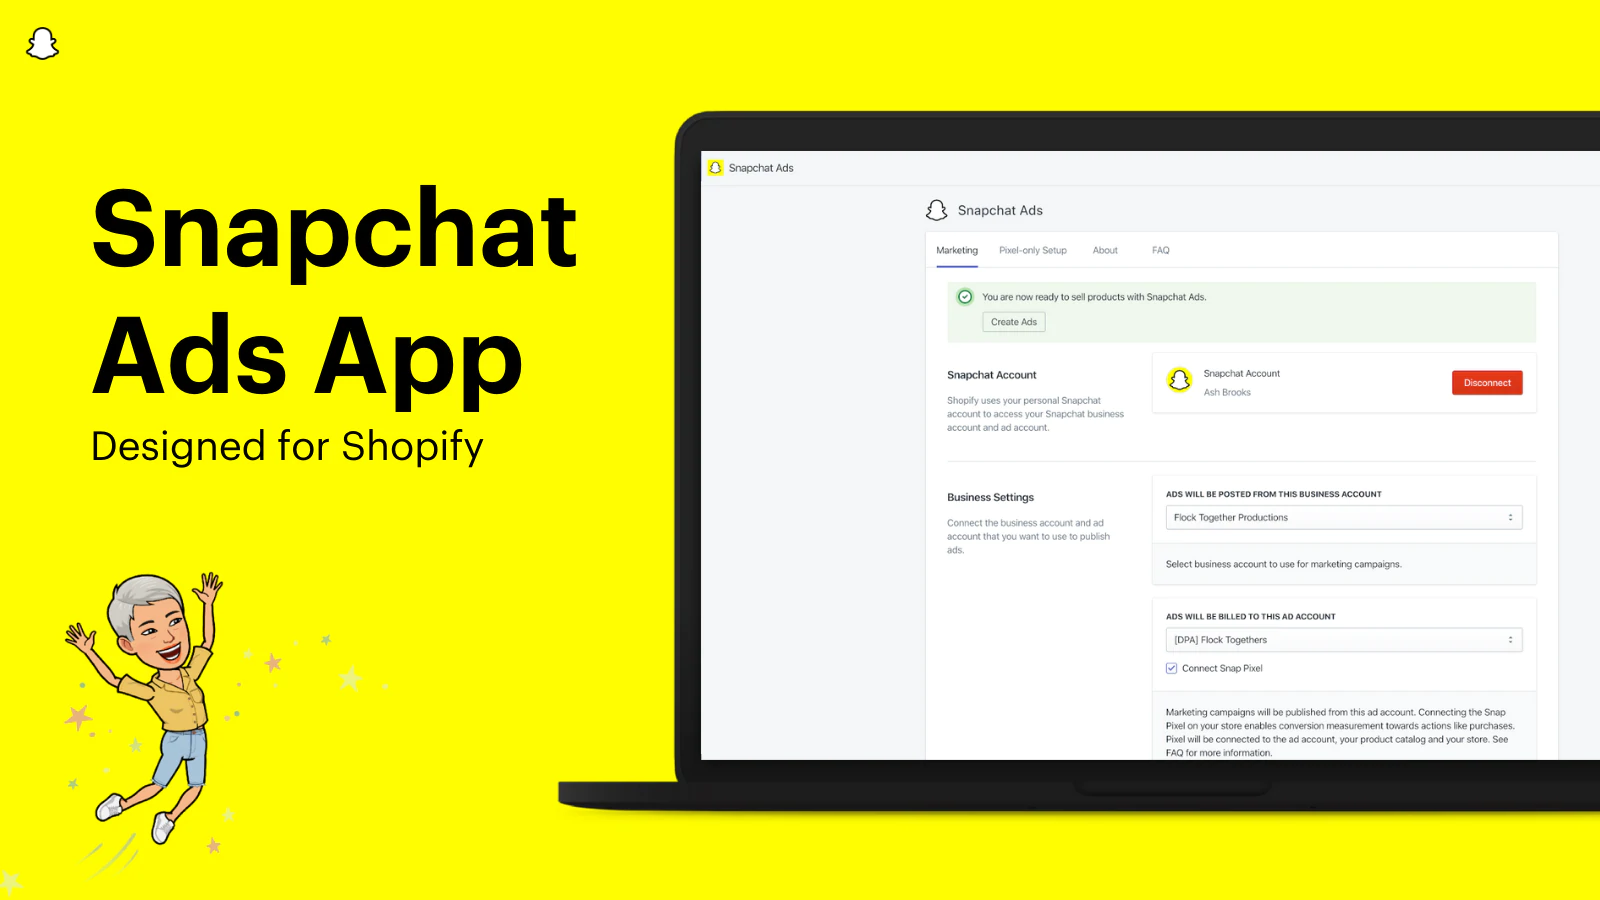 A screenshot of the Snapchat ads app next to the text, Snapchat ads app designed for Shopify on a yellow background